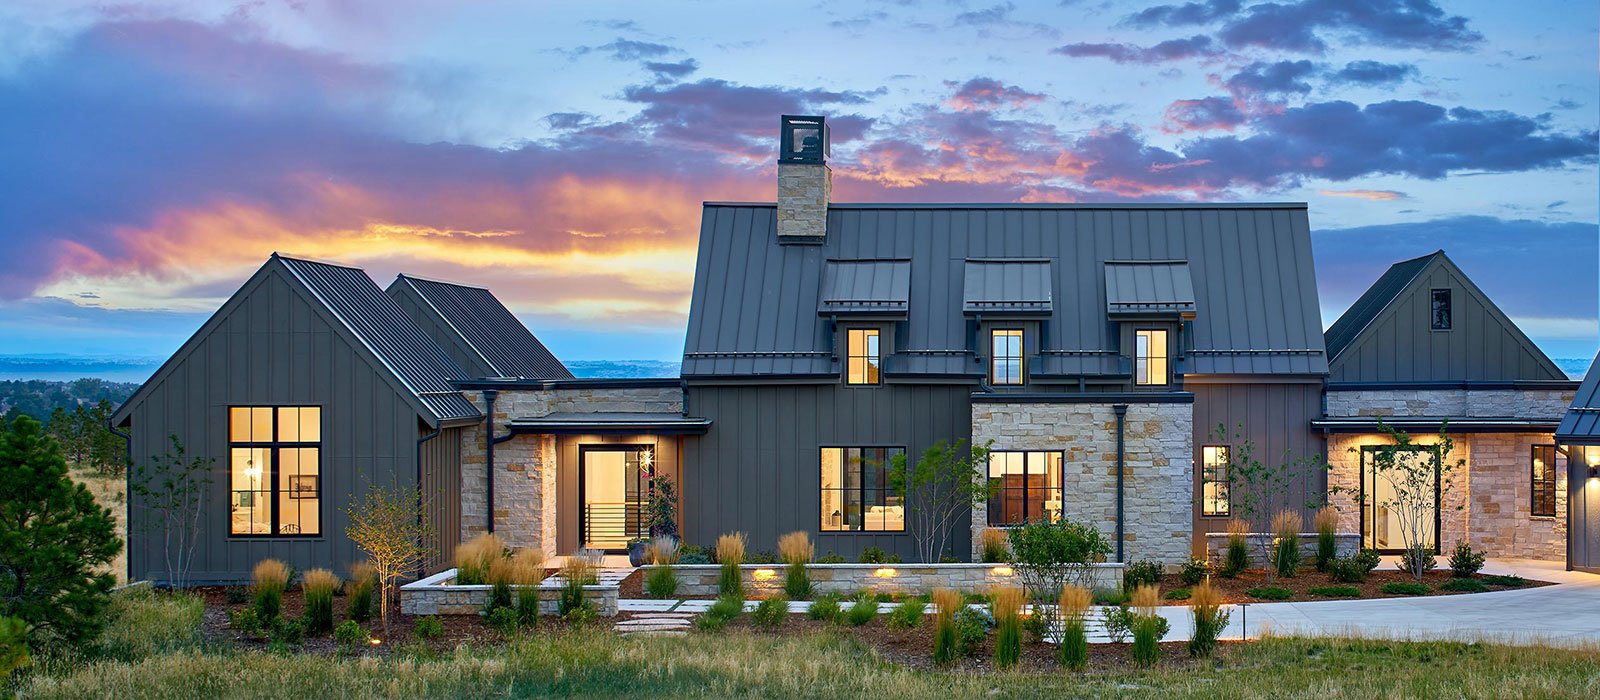 Come take a tour of this gorgeous 5,000 sq. ft. contemporary farmhouse located in the Colorado mountains.